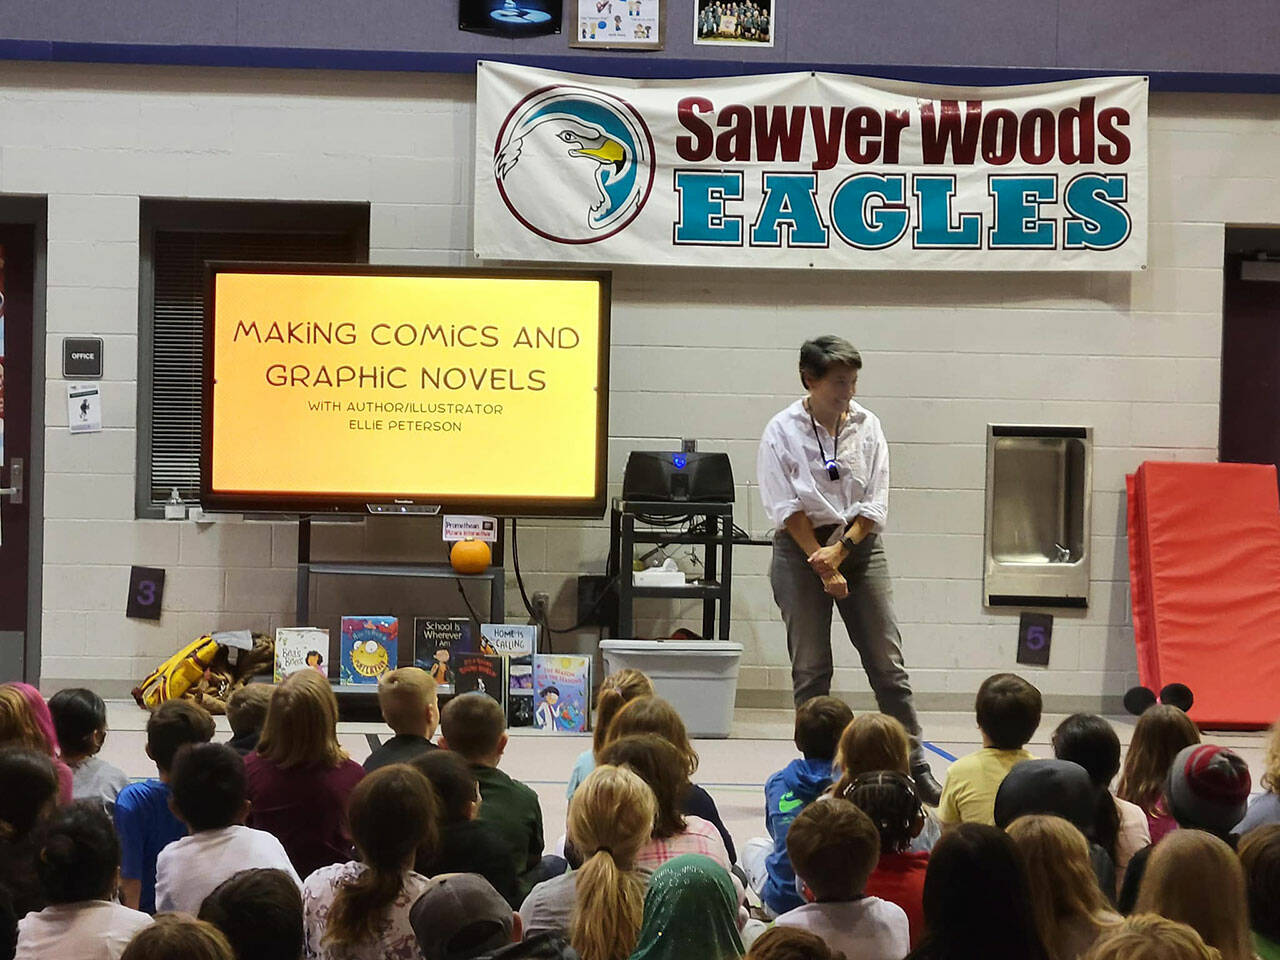 Grants to the Kent School District from the Kent Schools Foundation help fund a variety of programs, including when author Ellie Peterson visited Sawyer Woods Elementary School in Black Diamond. COURTESY PHOTO, Kent Schools Foundation